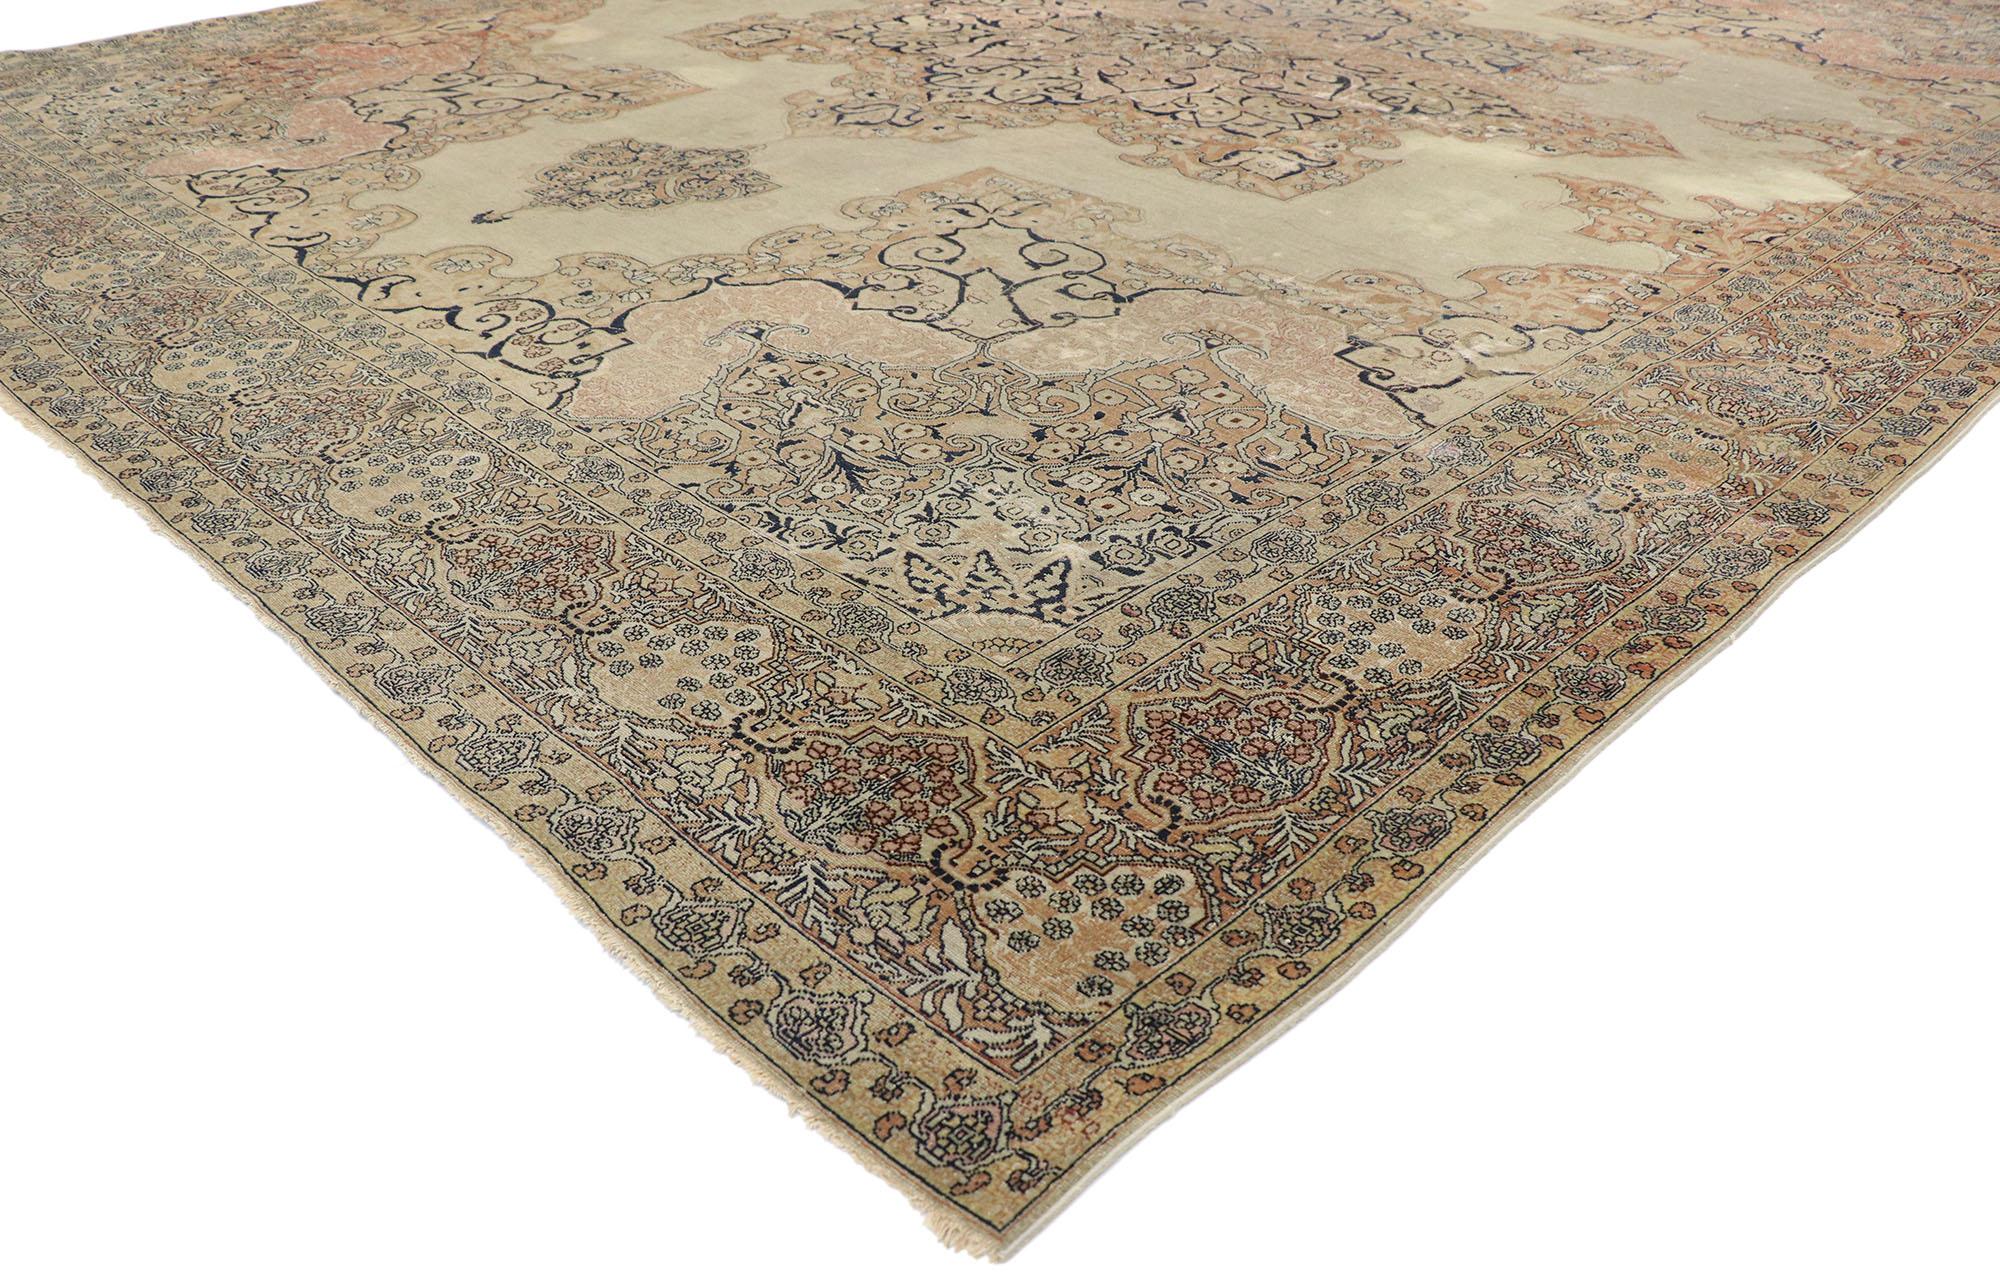 77627 Distressed Antique Persian Kerman rug with relaxed French Provincial style. Cleverly composed with rustic sensibility and a hint of romantic connotations, this hand knotted wool distressed antique Persian Kerman rug will take on a curated